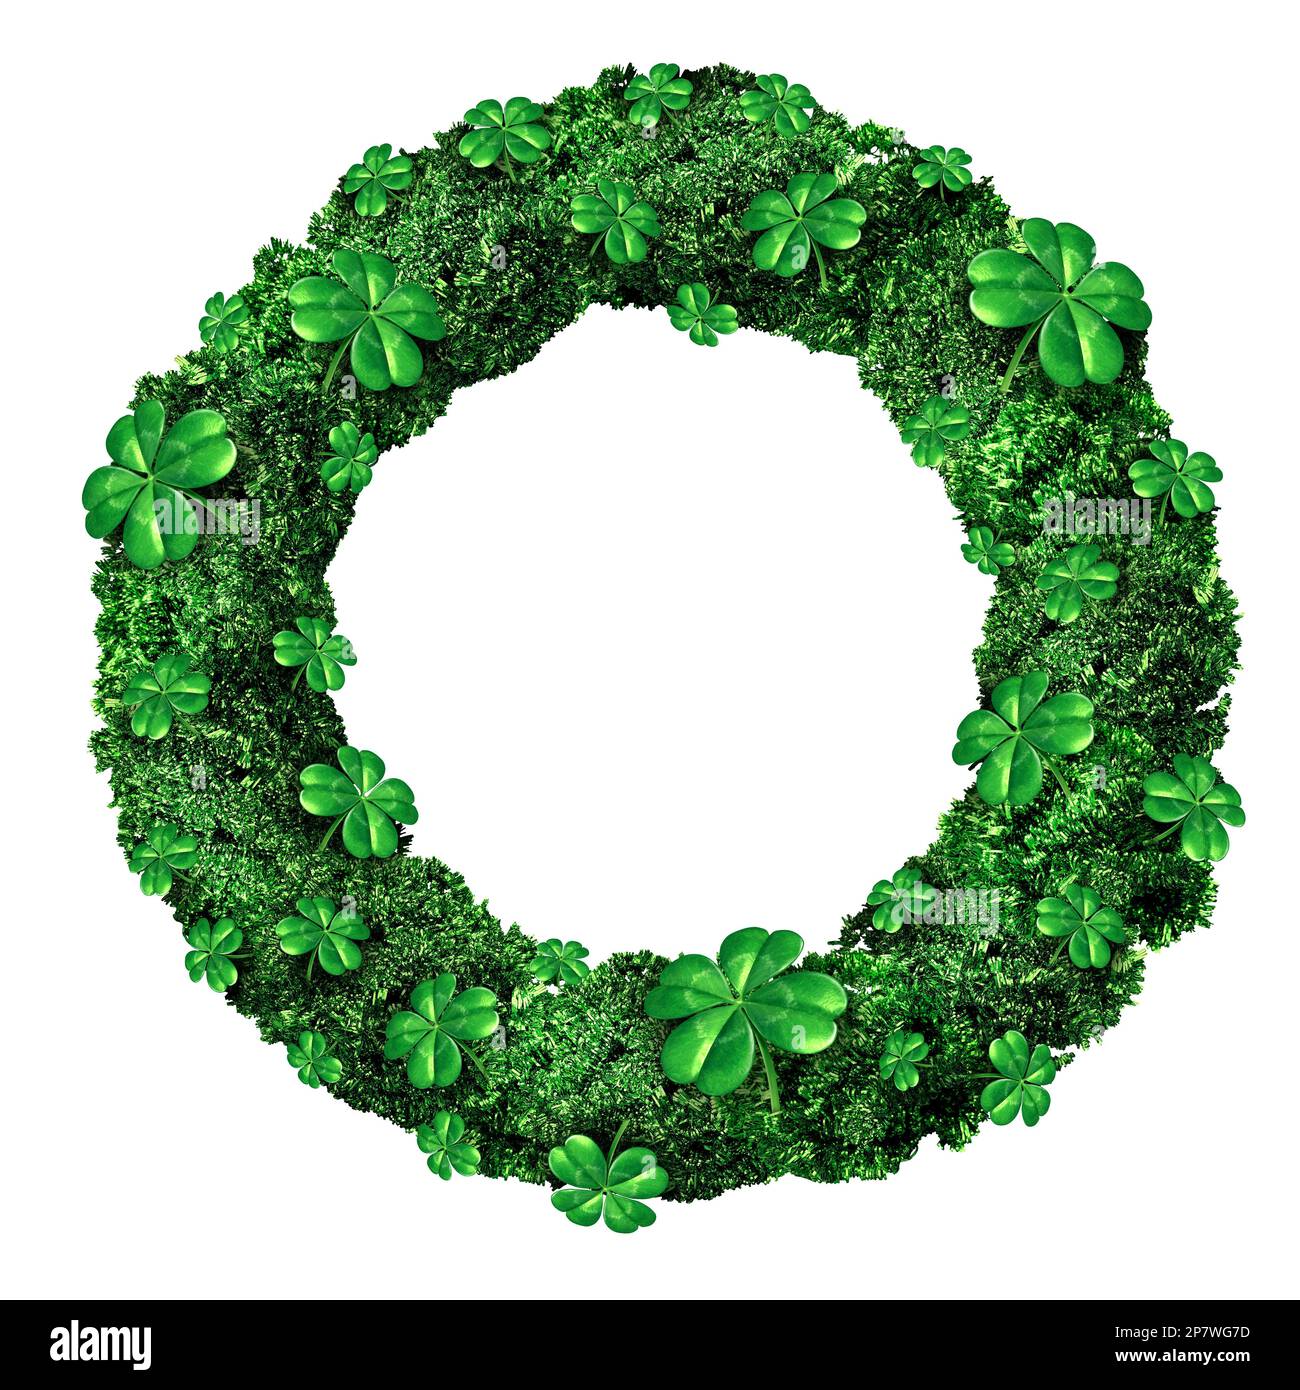 Saint Patricks Day Festive Wreath as a March celebration of Irish origin as a decorative green Holiday graphic element to celebrate St Patrick. Stock Photo